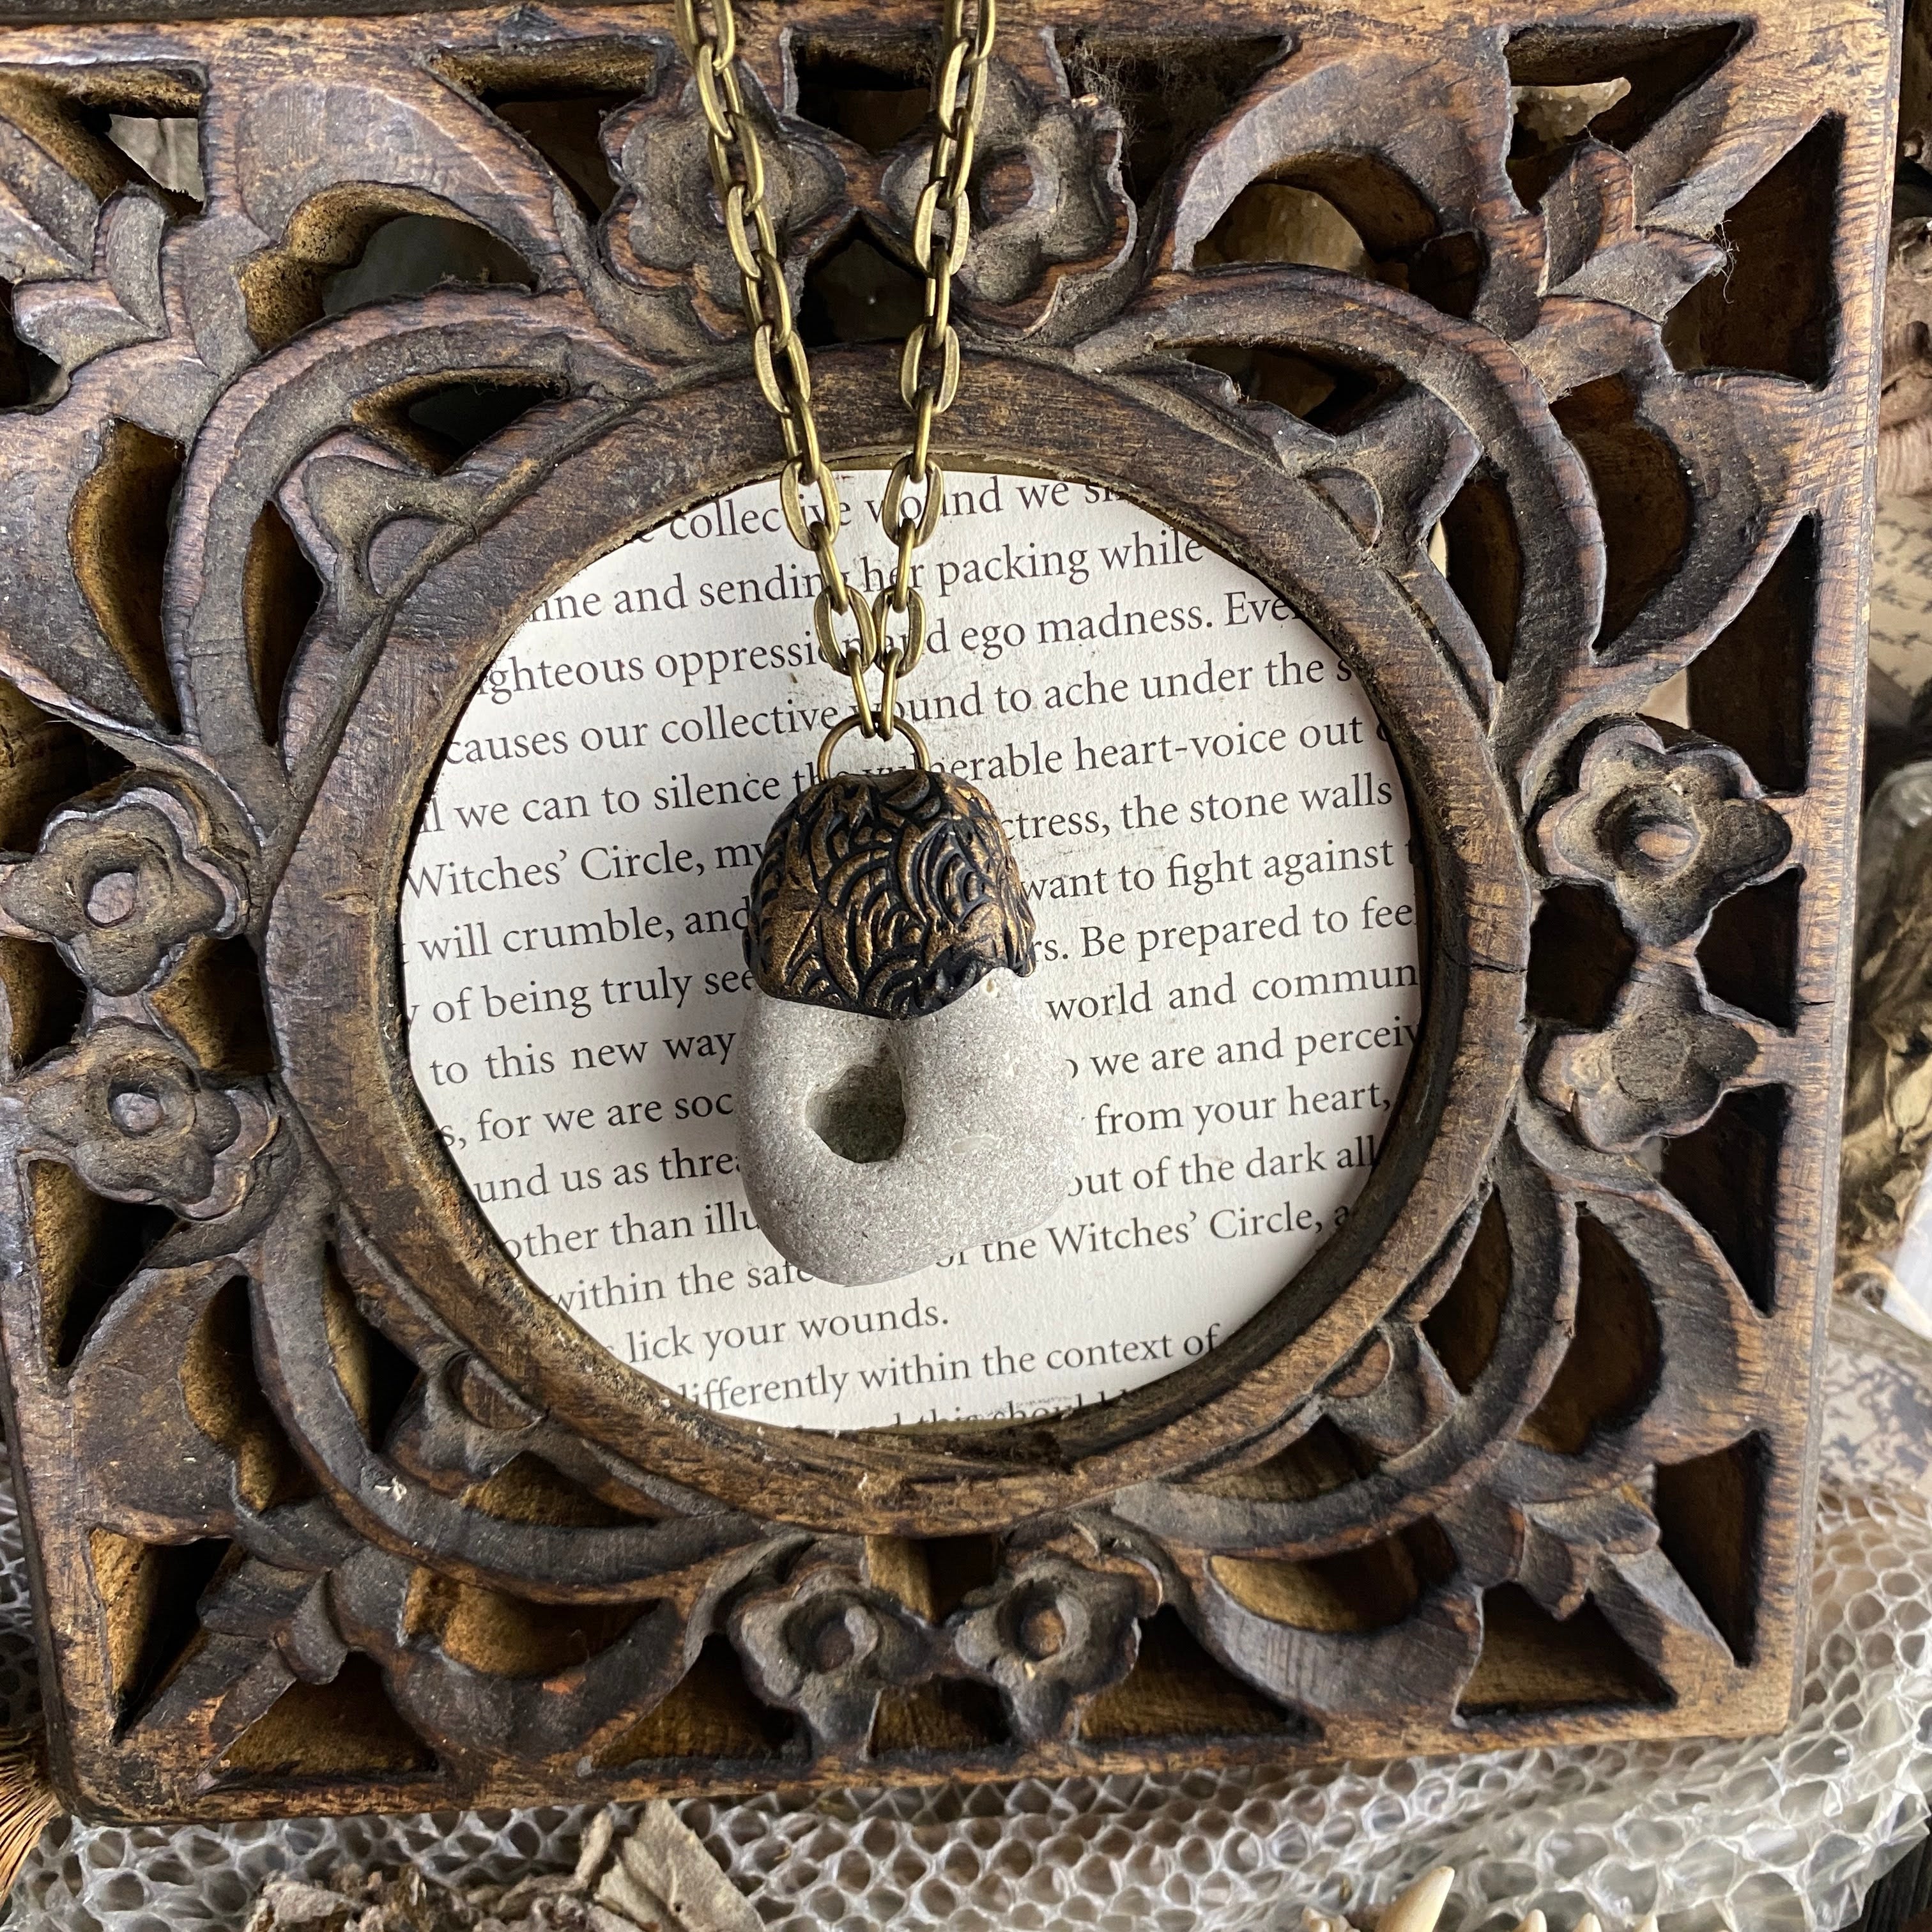 Hag Stone Talisman Necklace with a Tribal/Nature Inspired Design